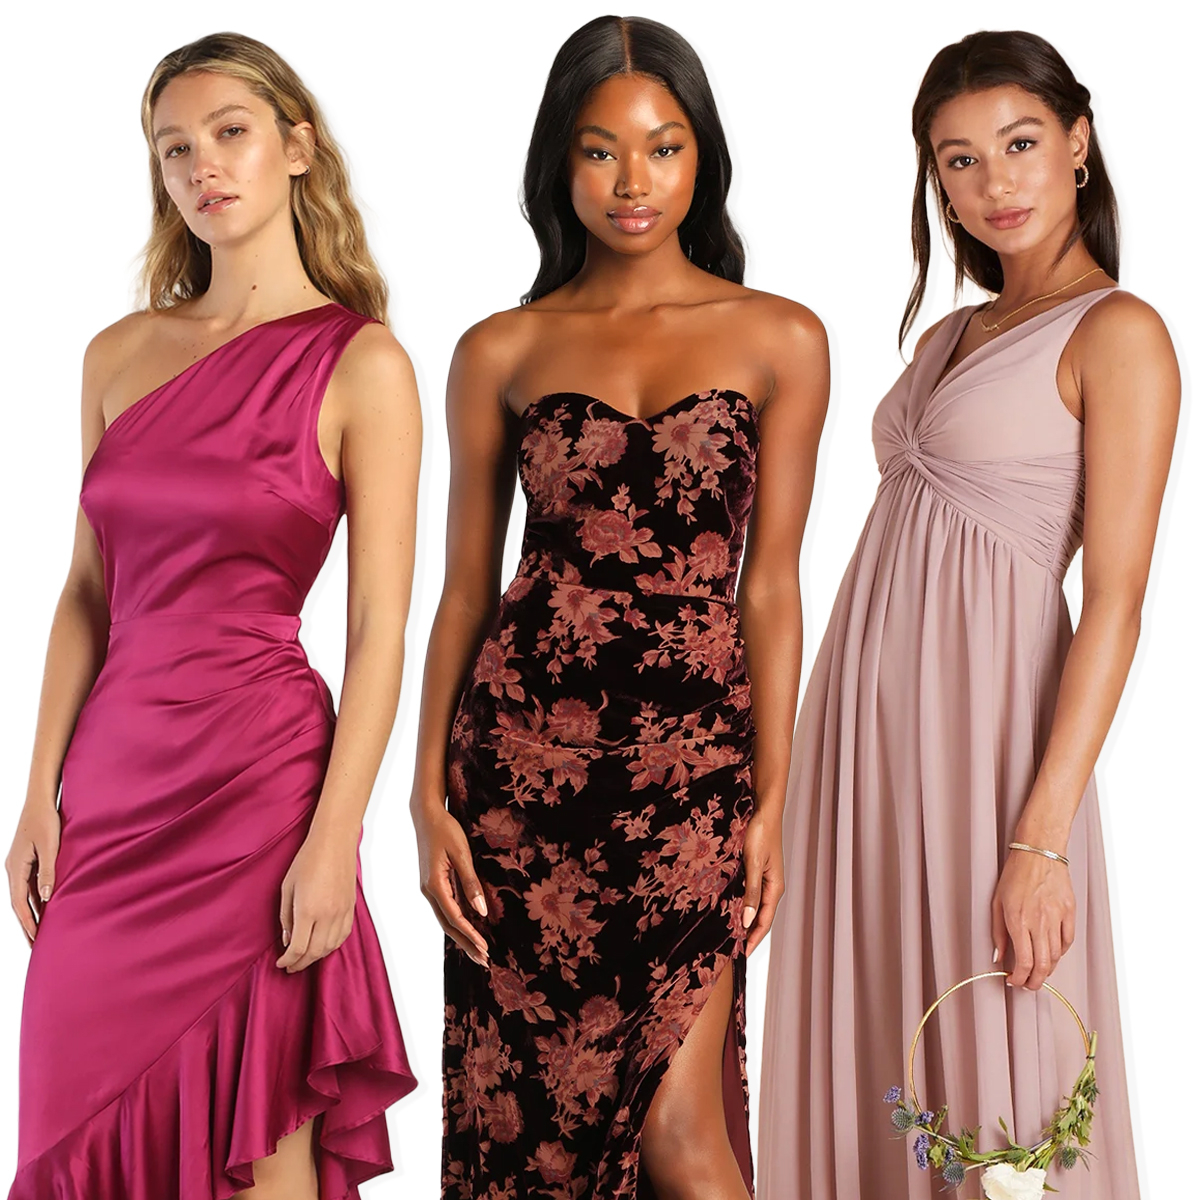 These 10 Spring Wedding Guest Dresses Are Under $50 at